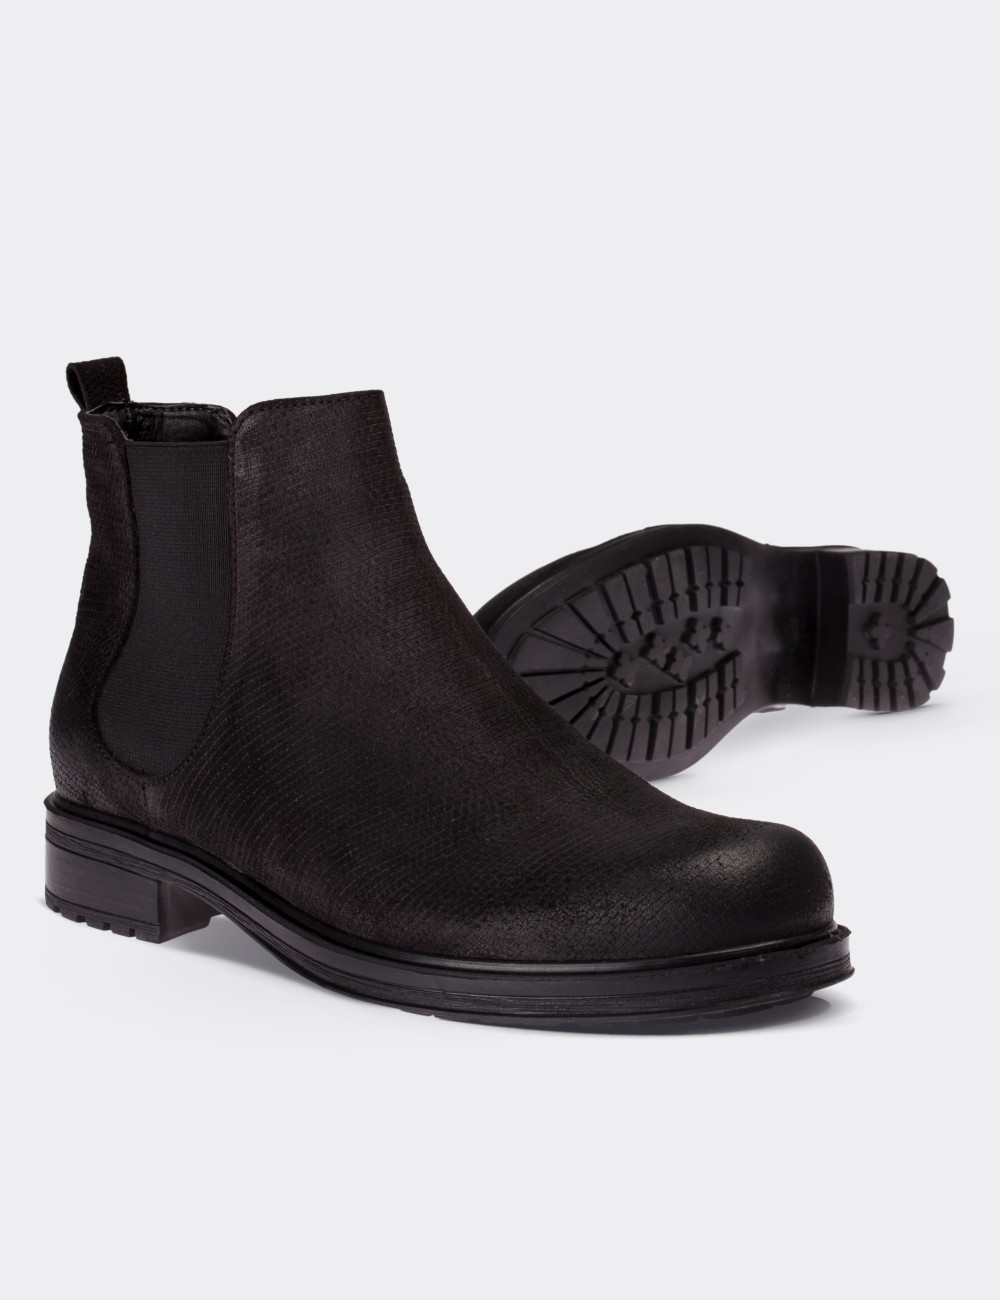 Black Suede Leather Chelsea Boots - 01573ZSYHC01